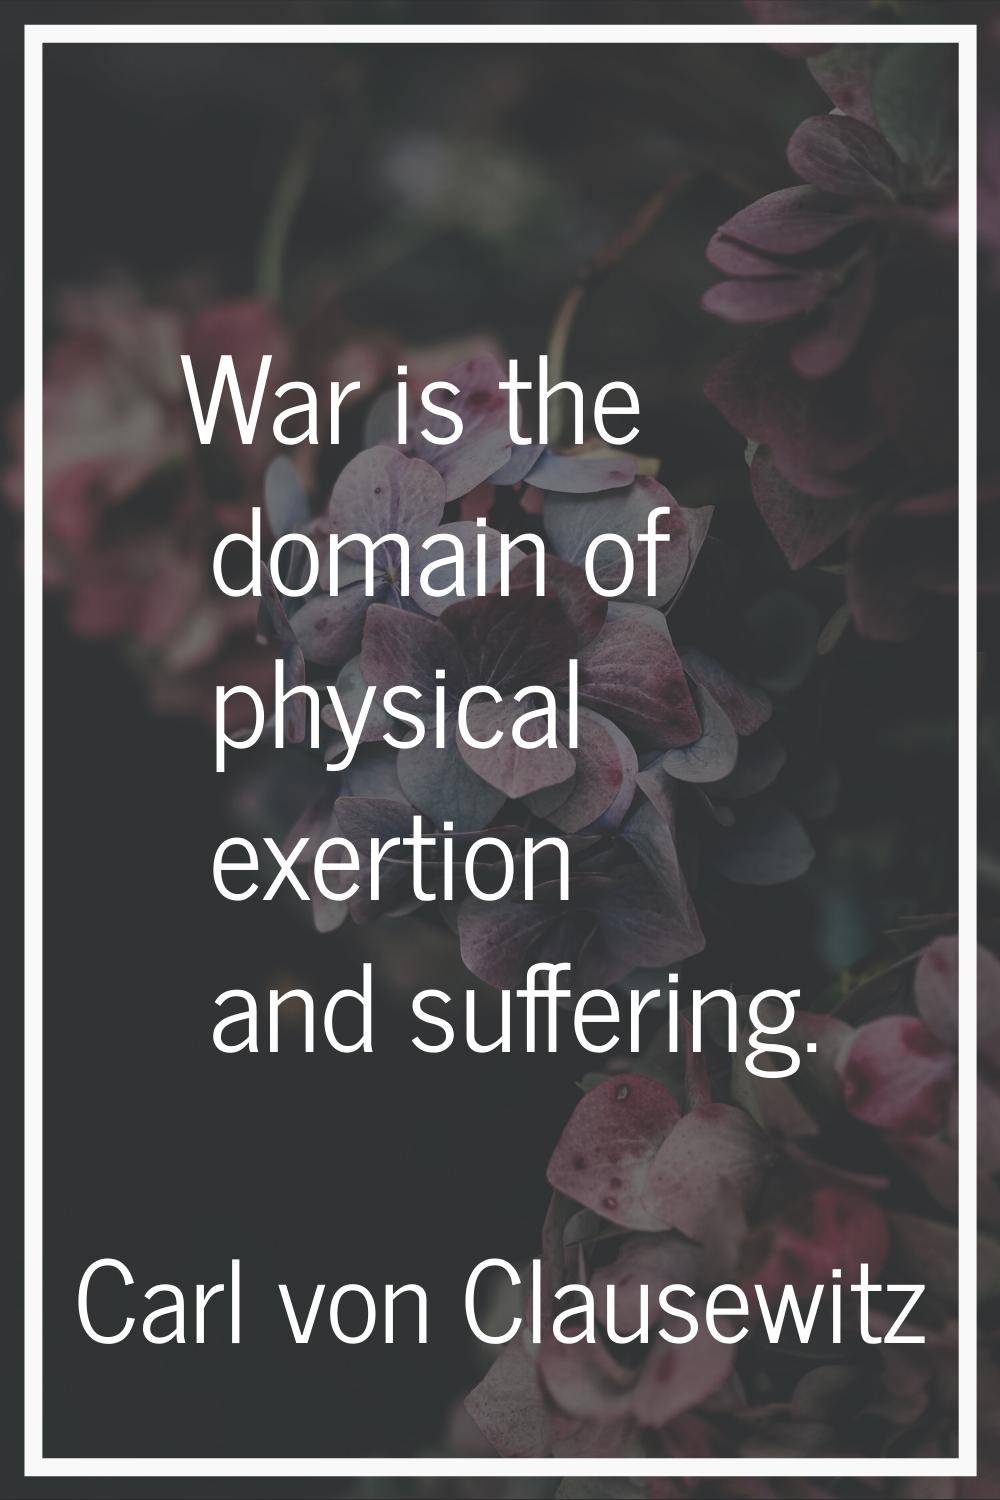 War is the domain of physical exertion and suffering.